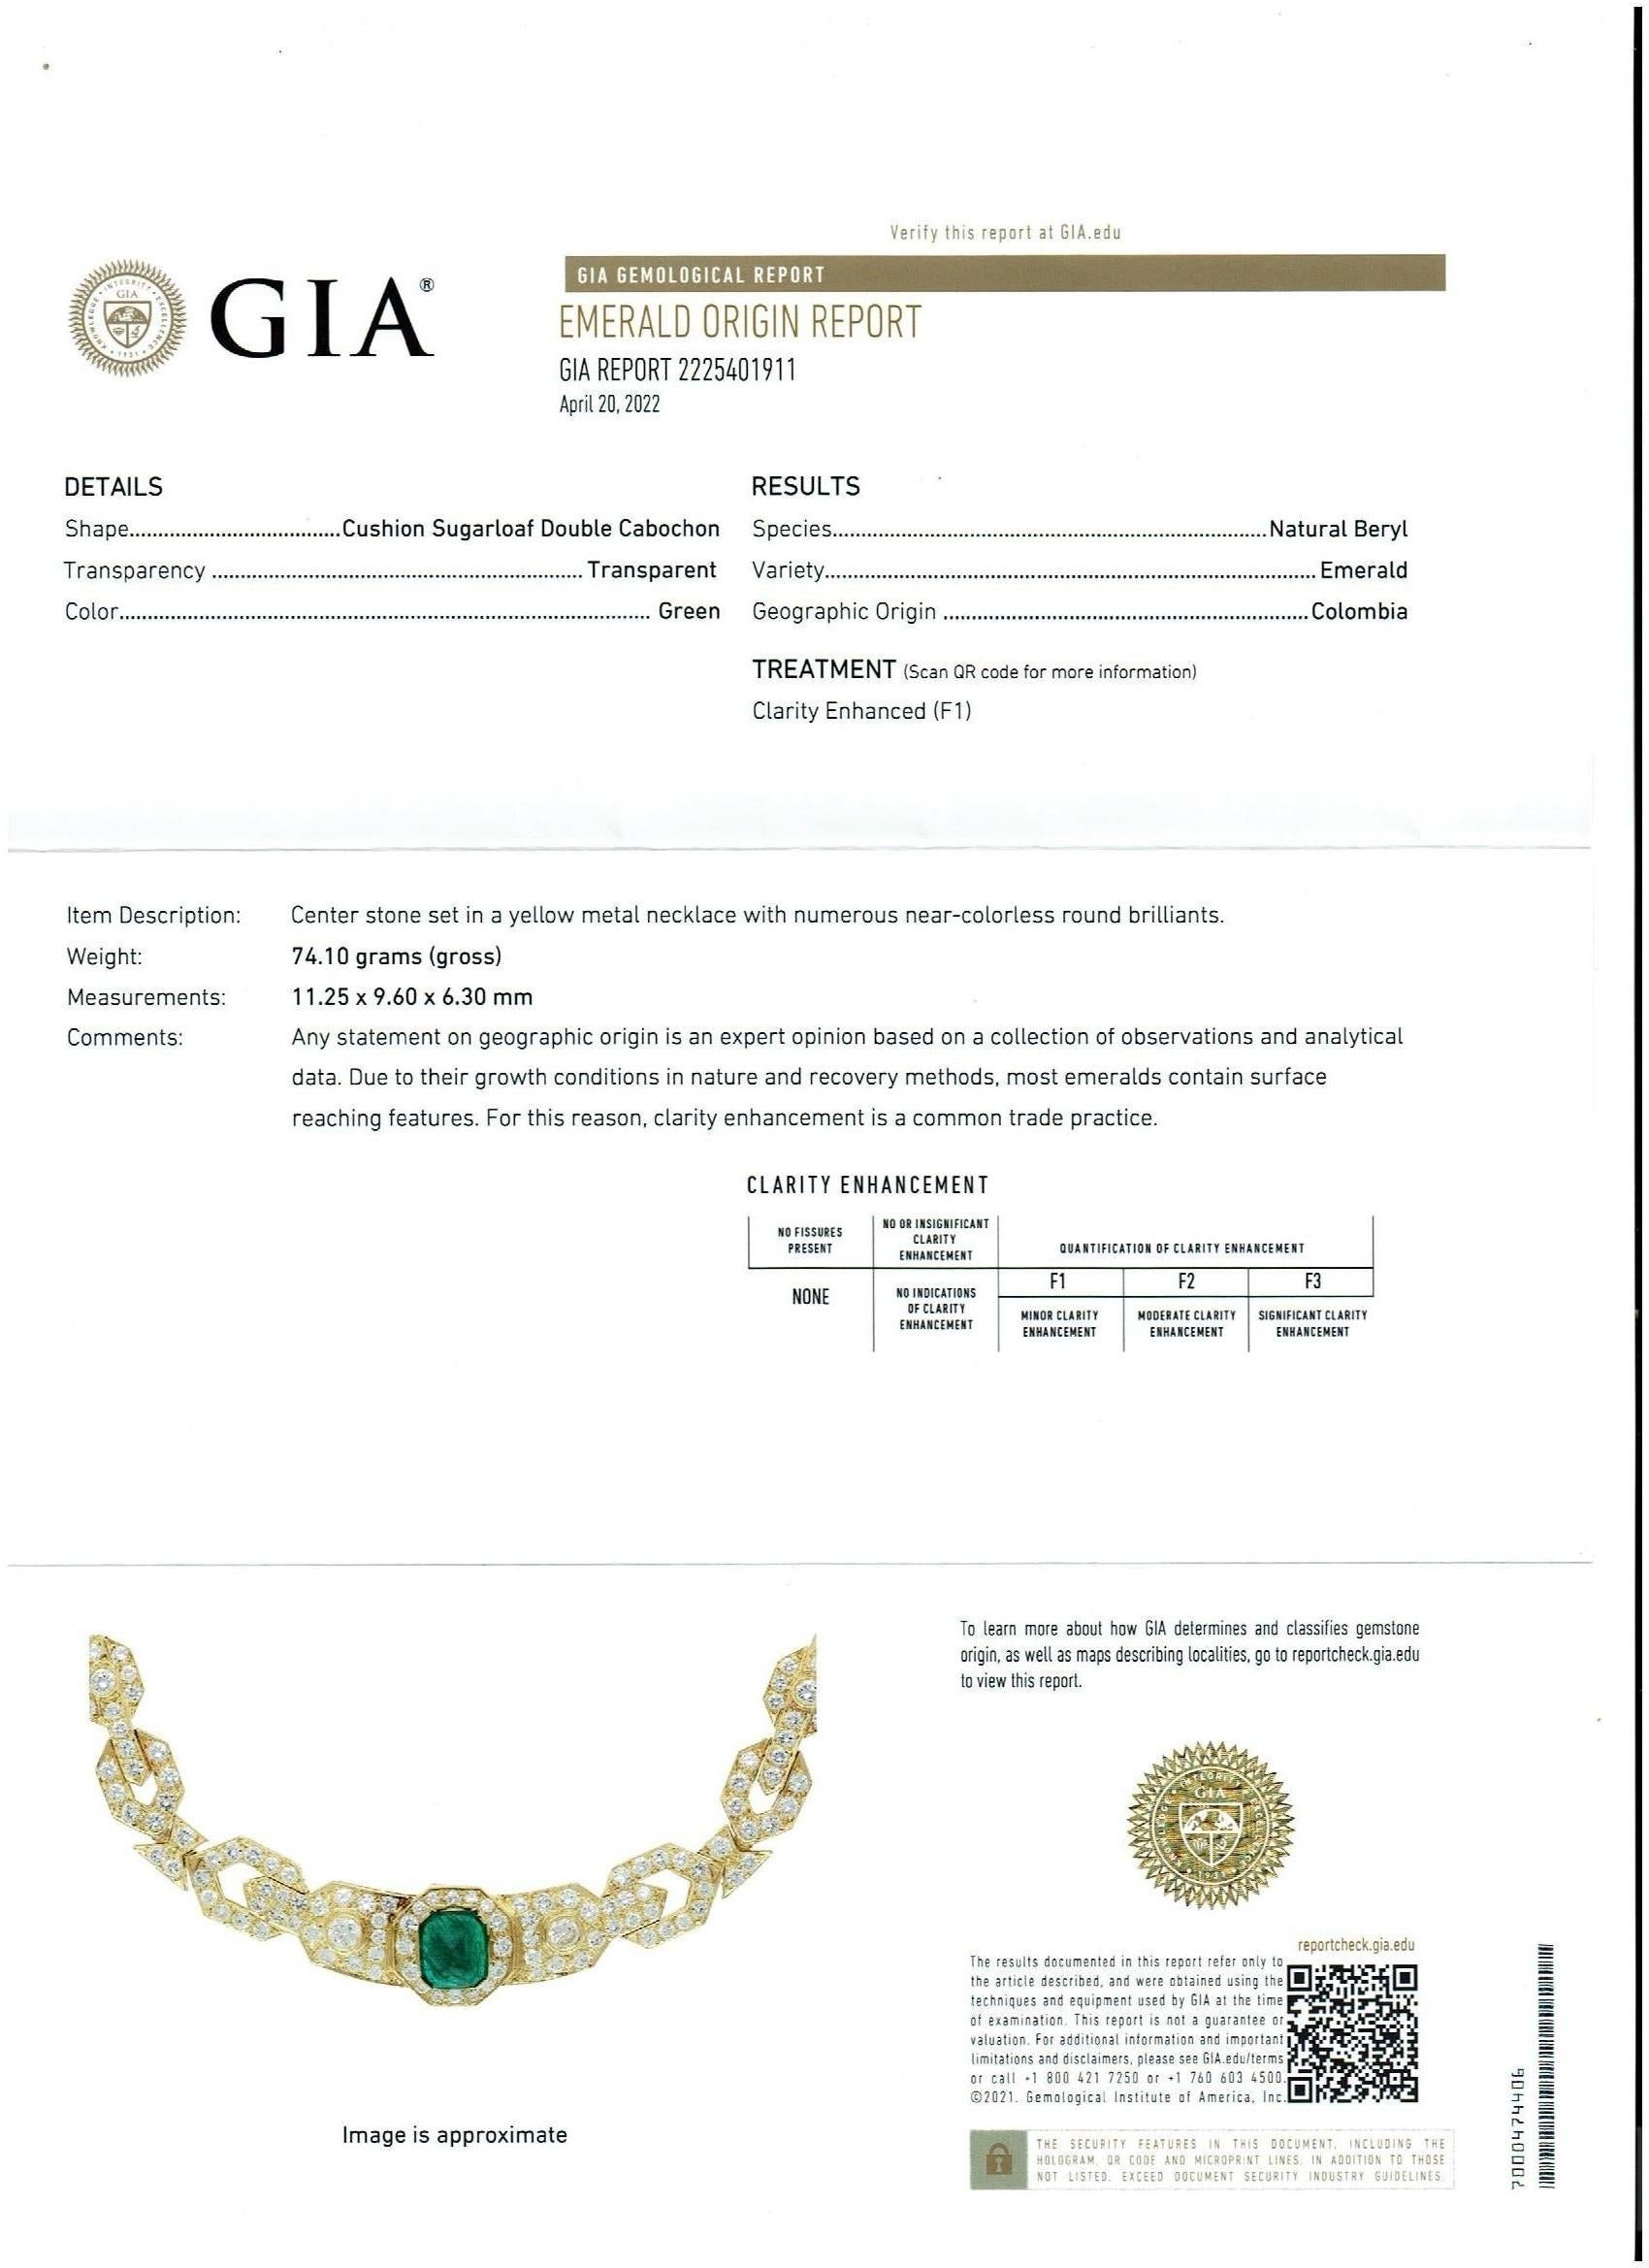 GIA Certified 7 Ct Sugar Loaf Cabochon Colombian Emerald Diamond Necklace 18KYG For Sale 2